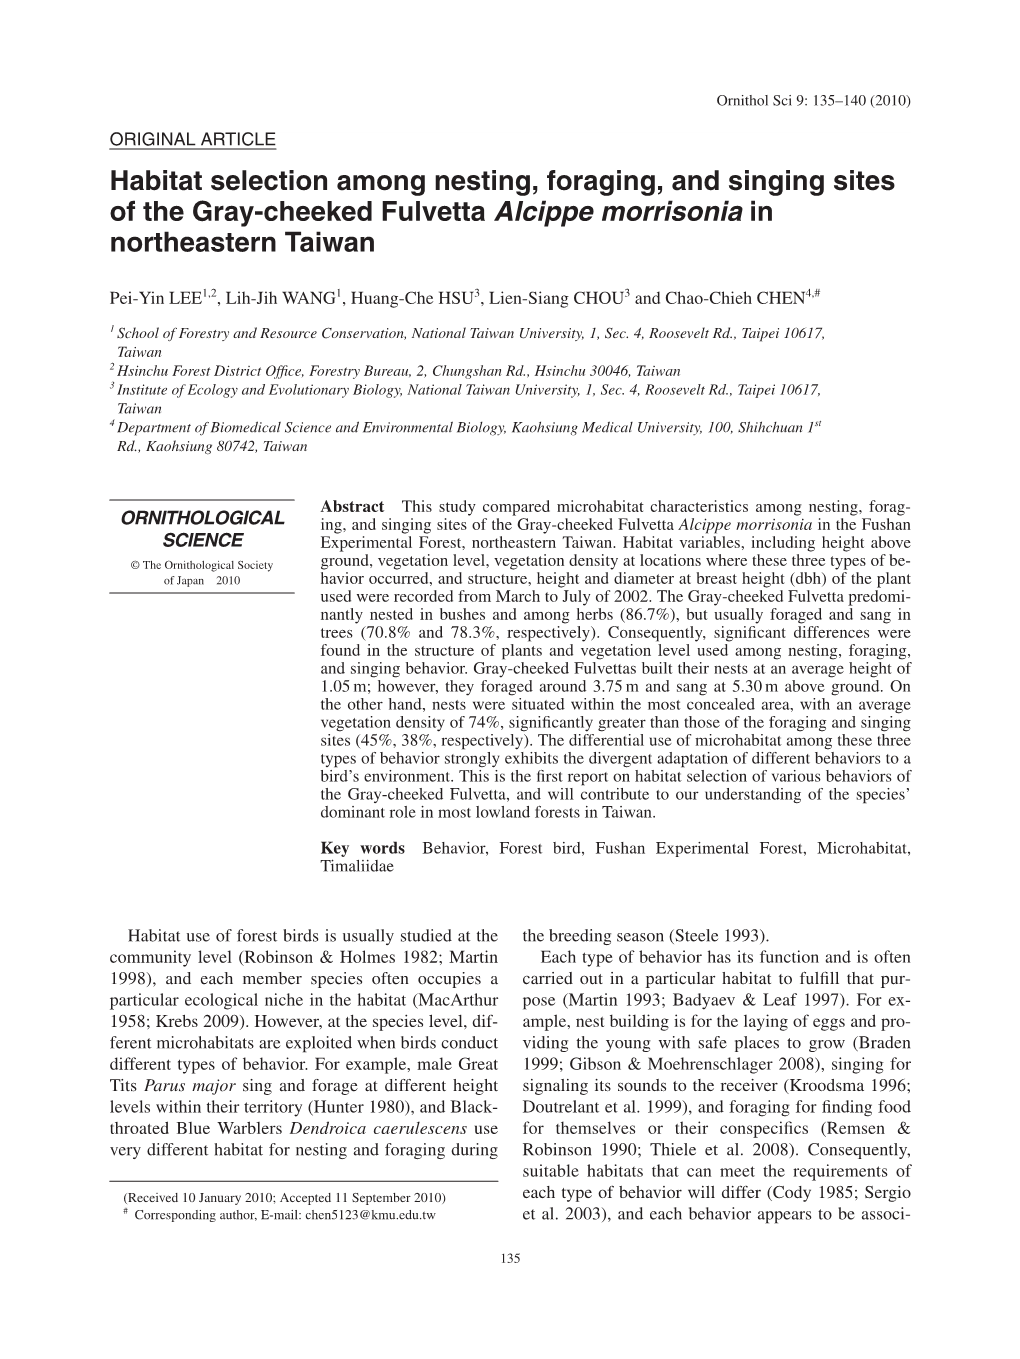 Habitat Selection Among Nesting, Foraging, and Singing Sites of the Gray-Cheeked Fulvetta Alcippe Morrisonia in Northeastern Taiwan